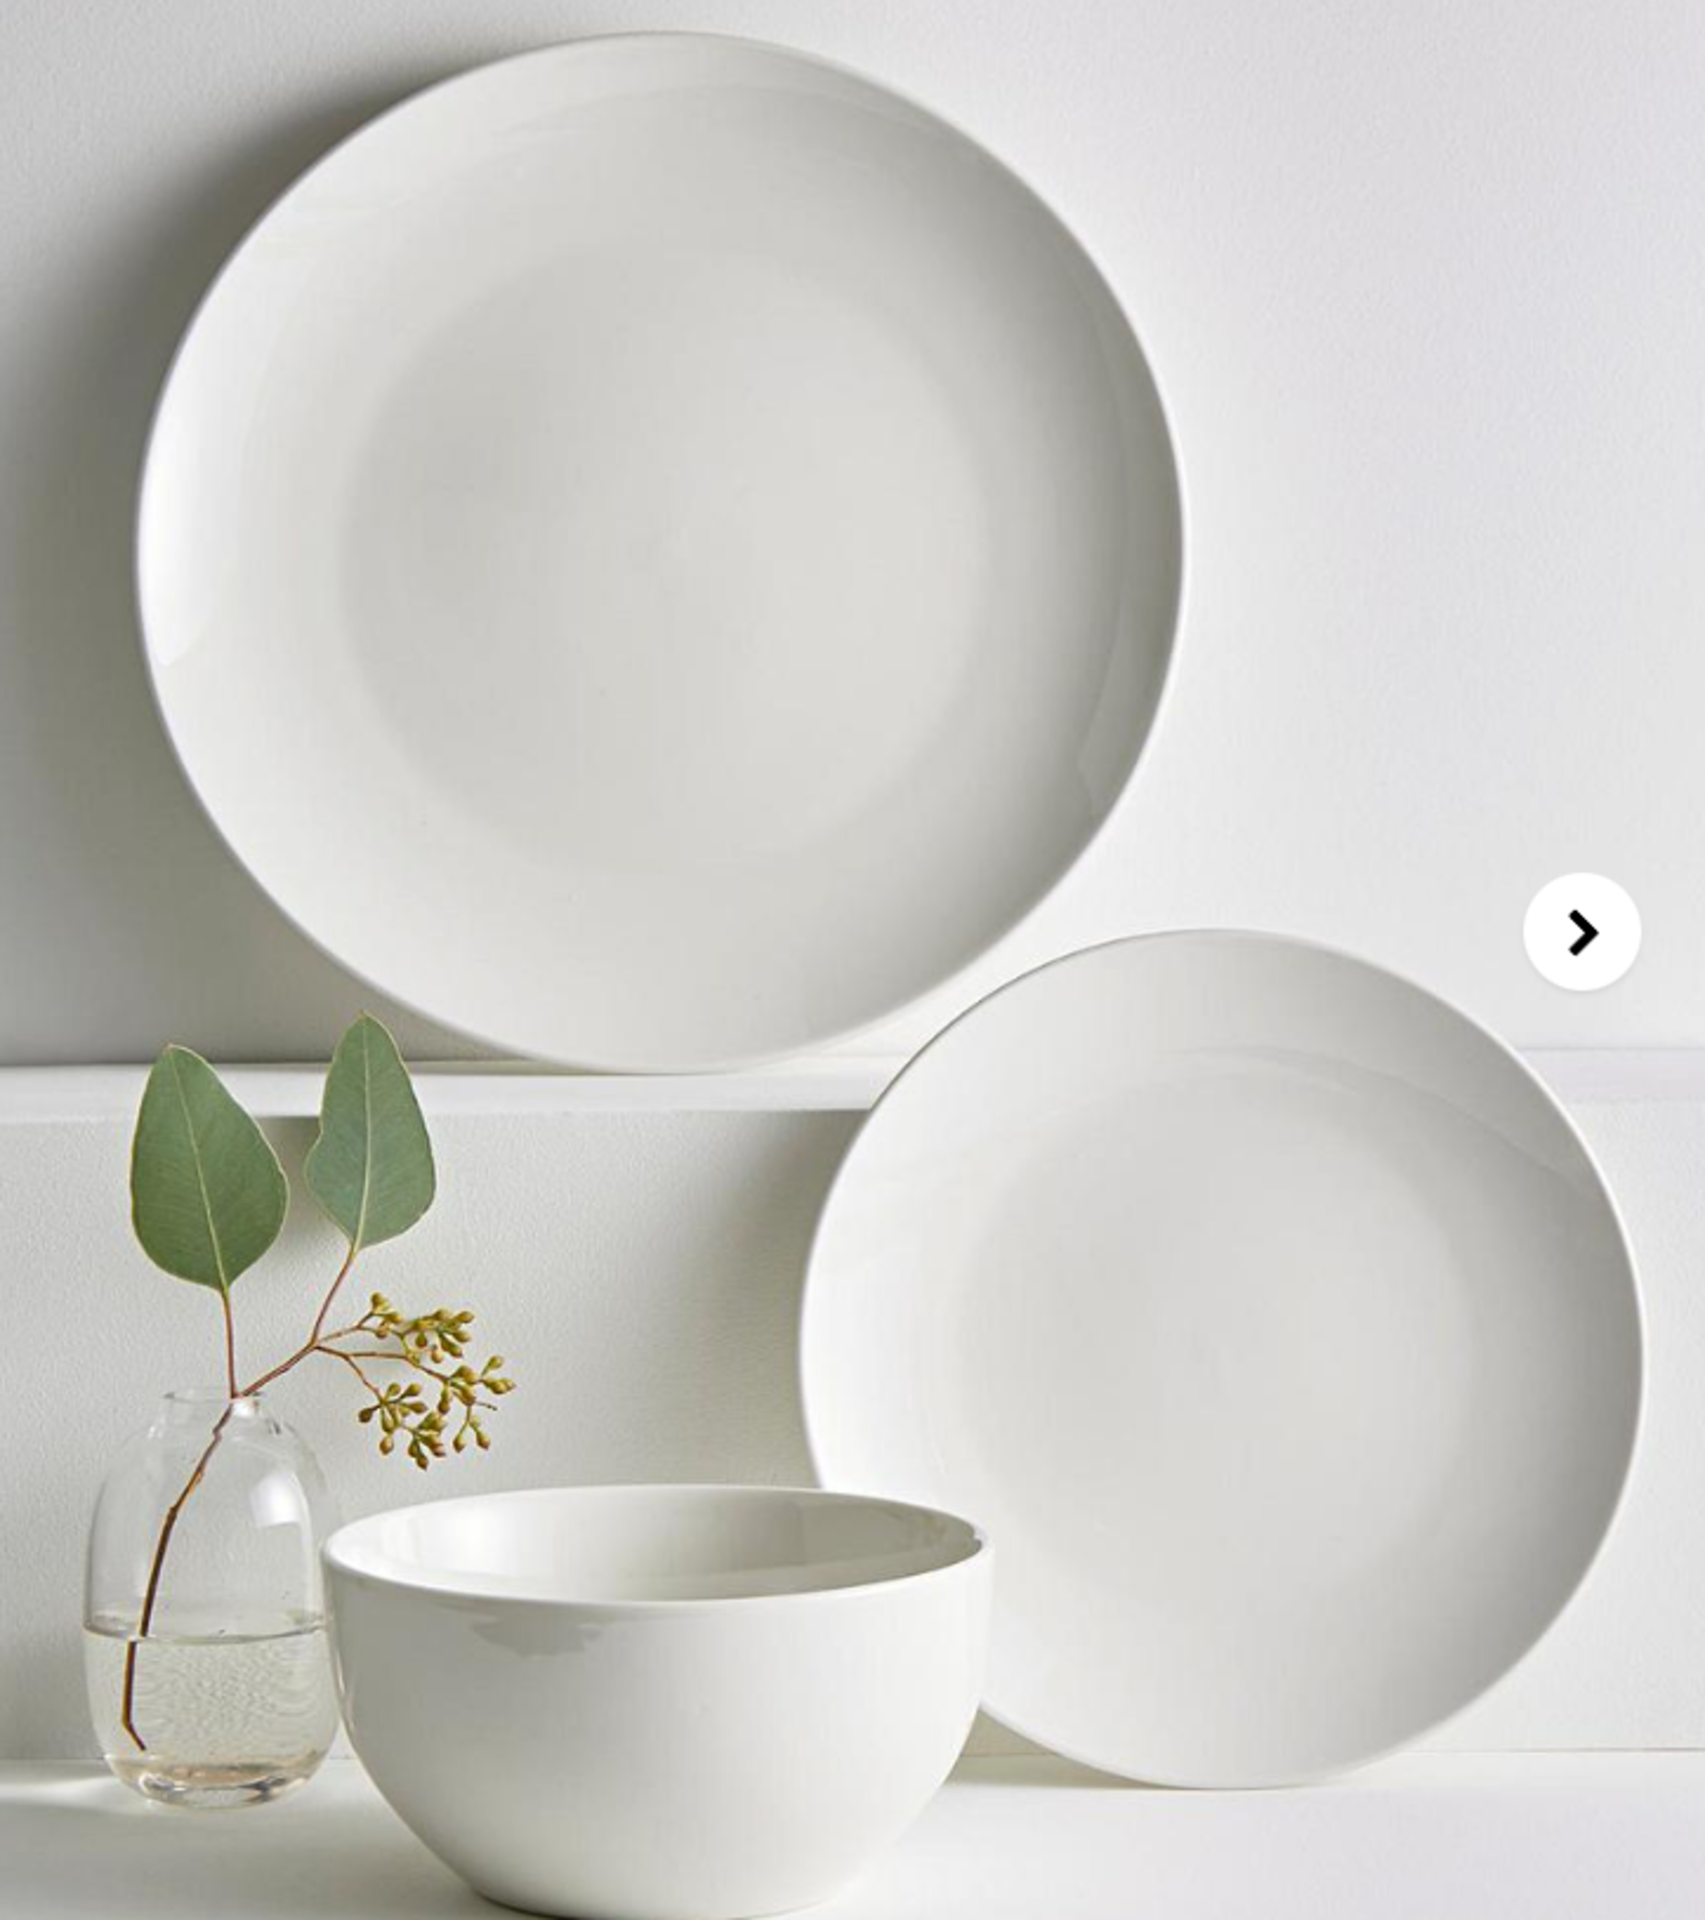 12 Piece White Dinner Set. - SR29. This simple and stylish 12 piece White dinner set will complement